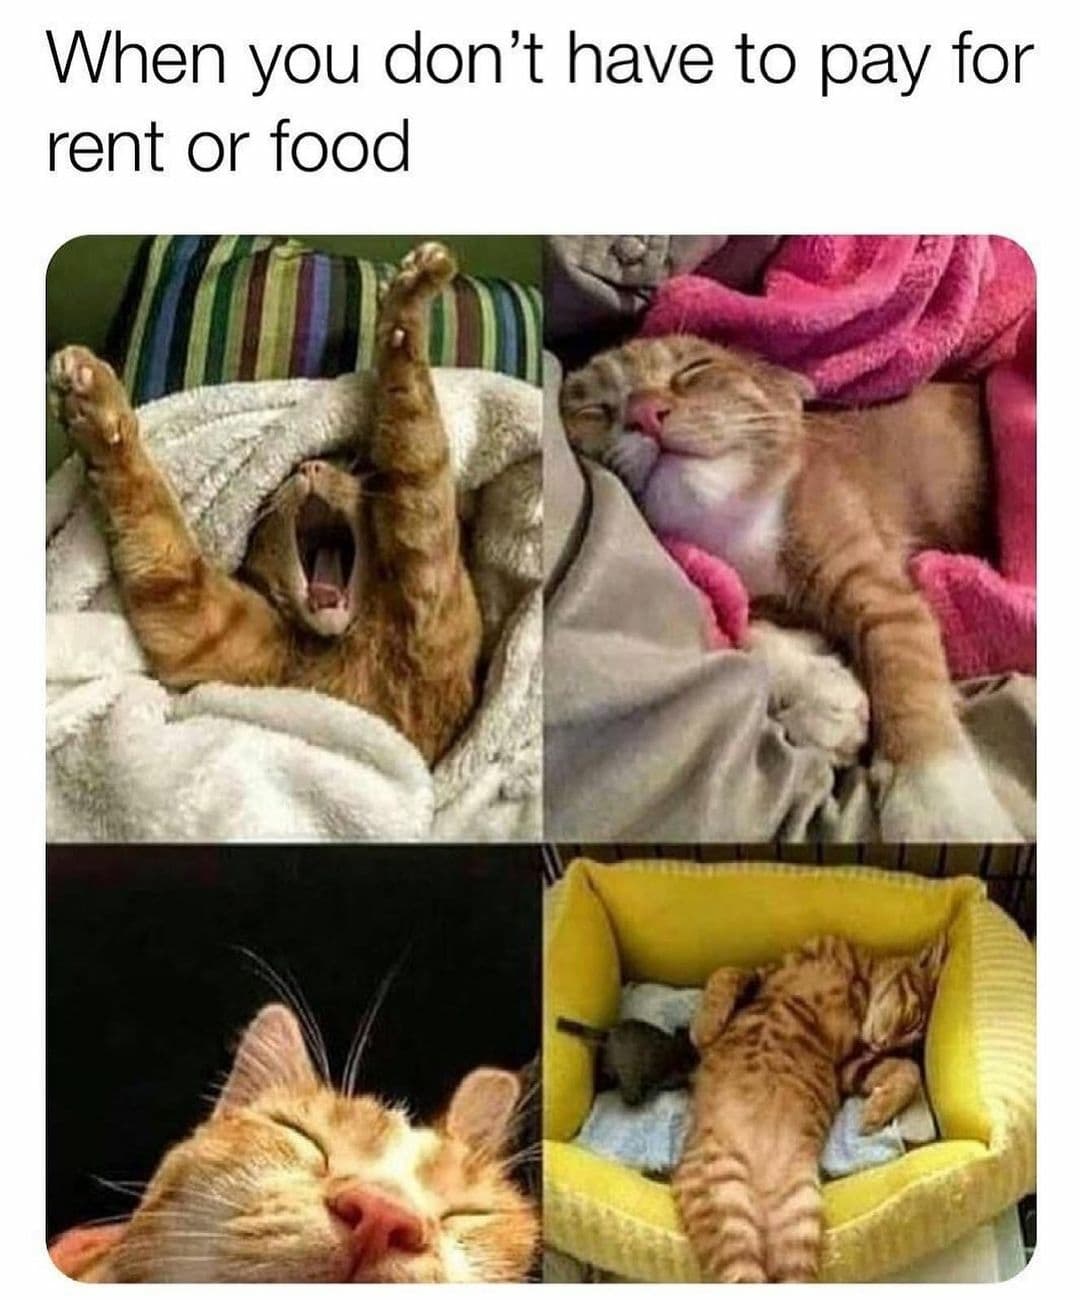 freeloader meme - When you don't have to pay for rent or food